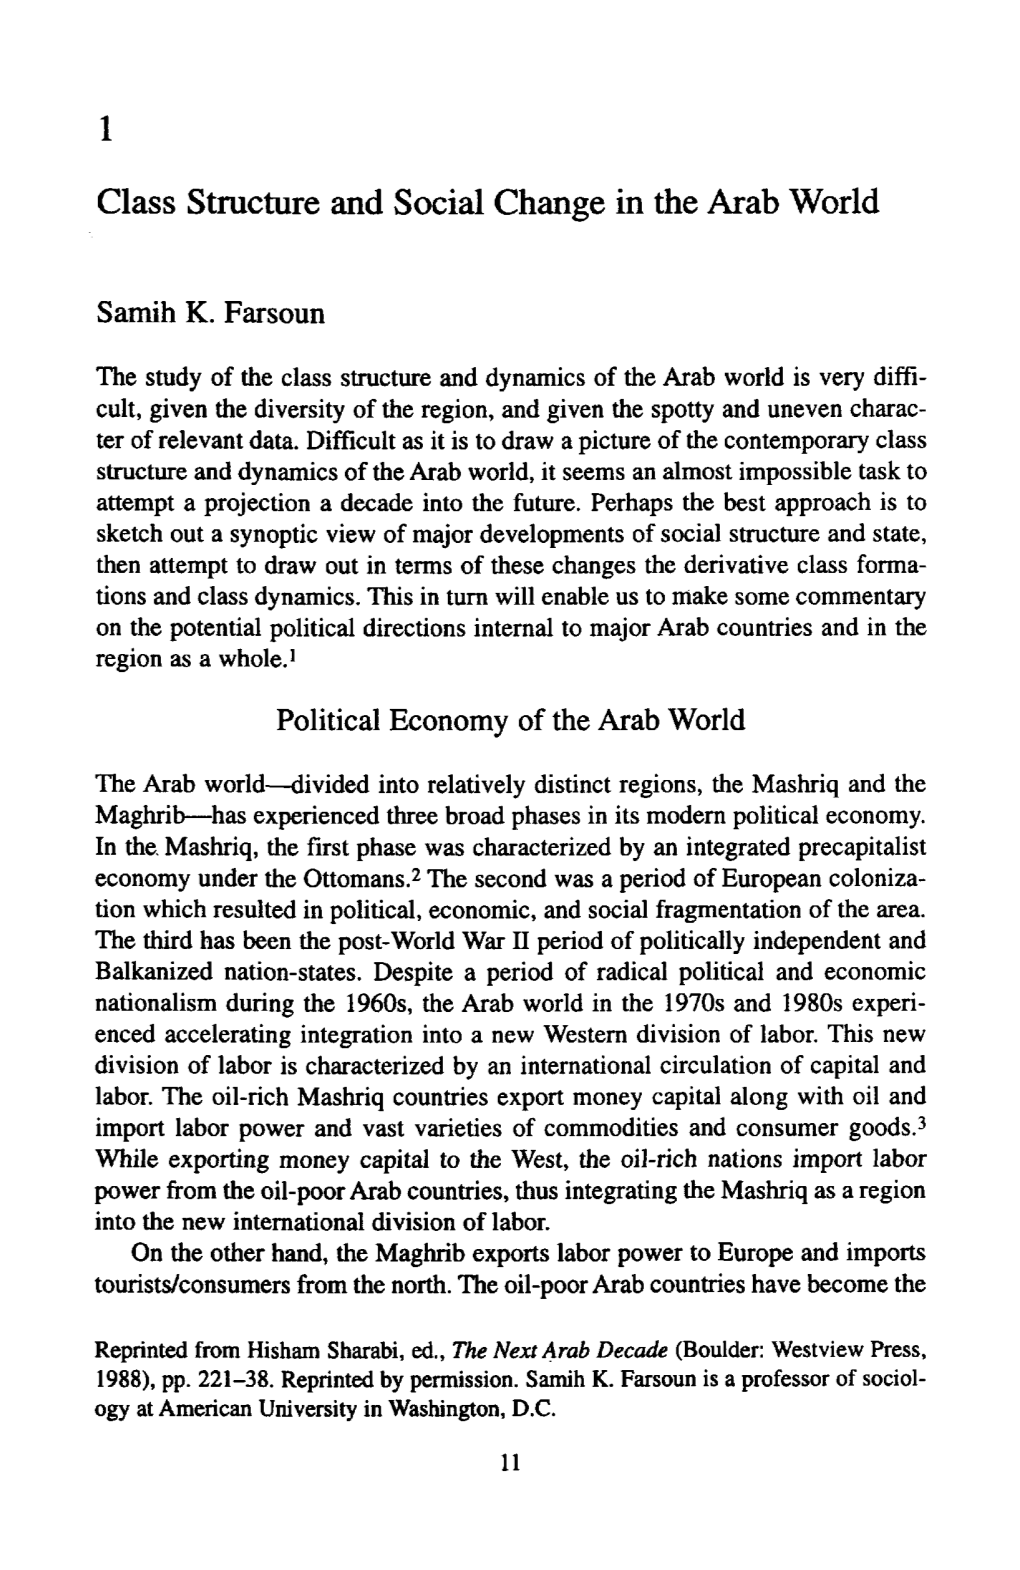 Class Structure and Social Change in the Arab World